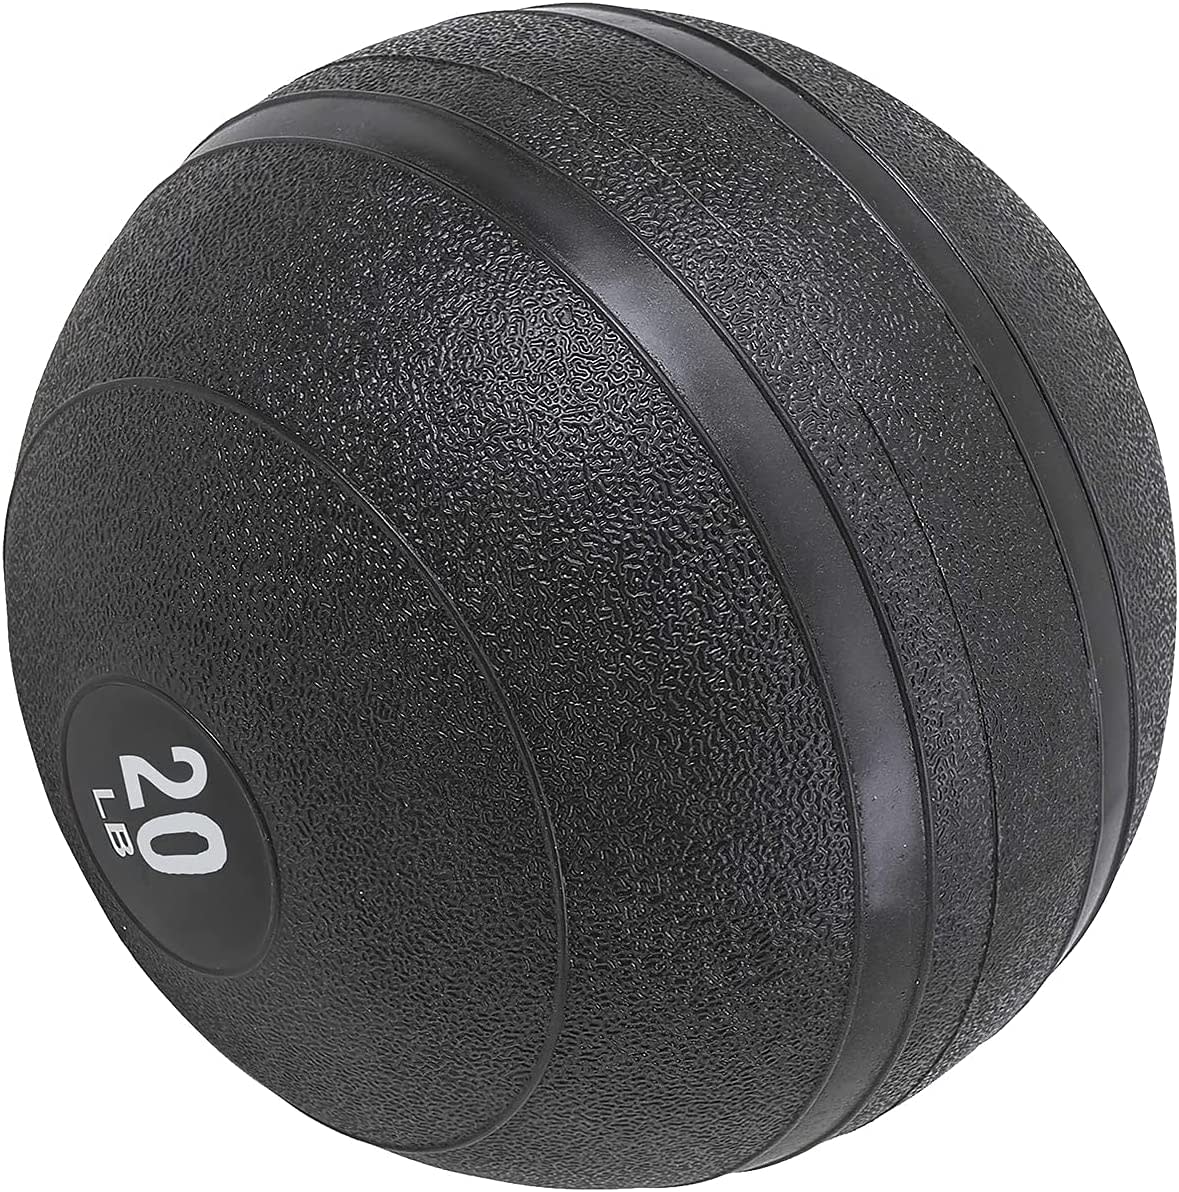 Slam/Wall Bal Textured Surface Fitness Gym Equipment for Strength and Conditioning Exercises, Cross Training, Cardio and Core Workouts